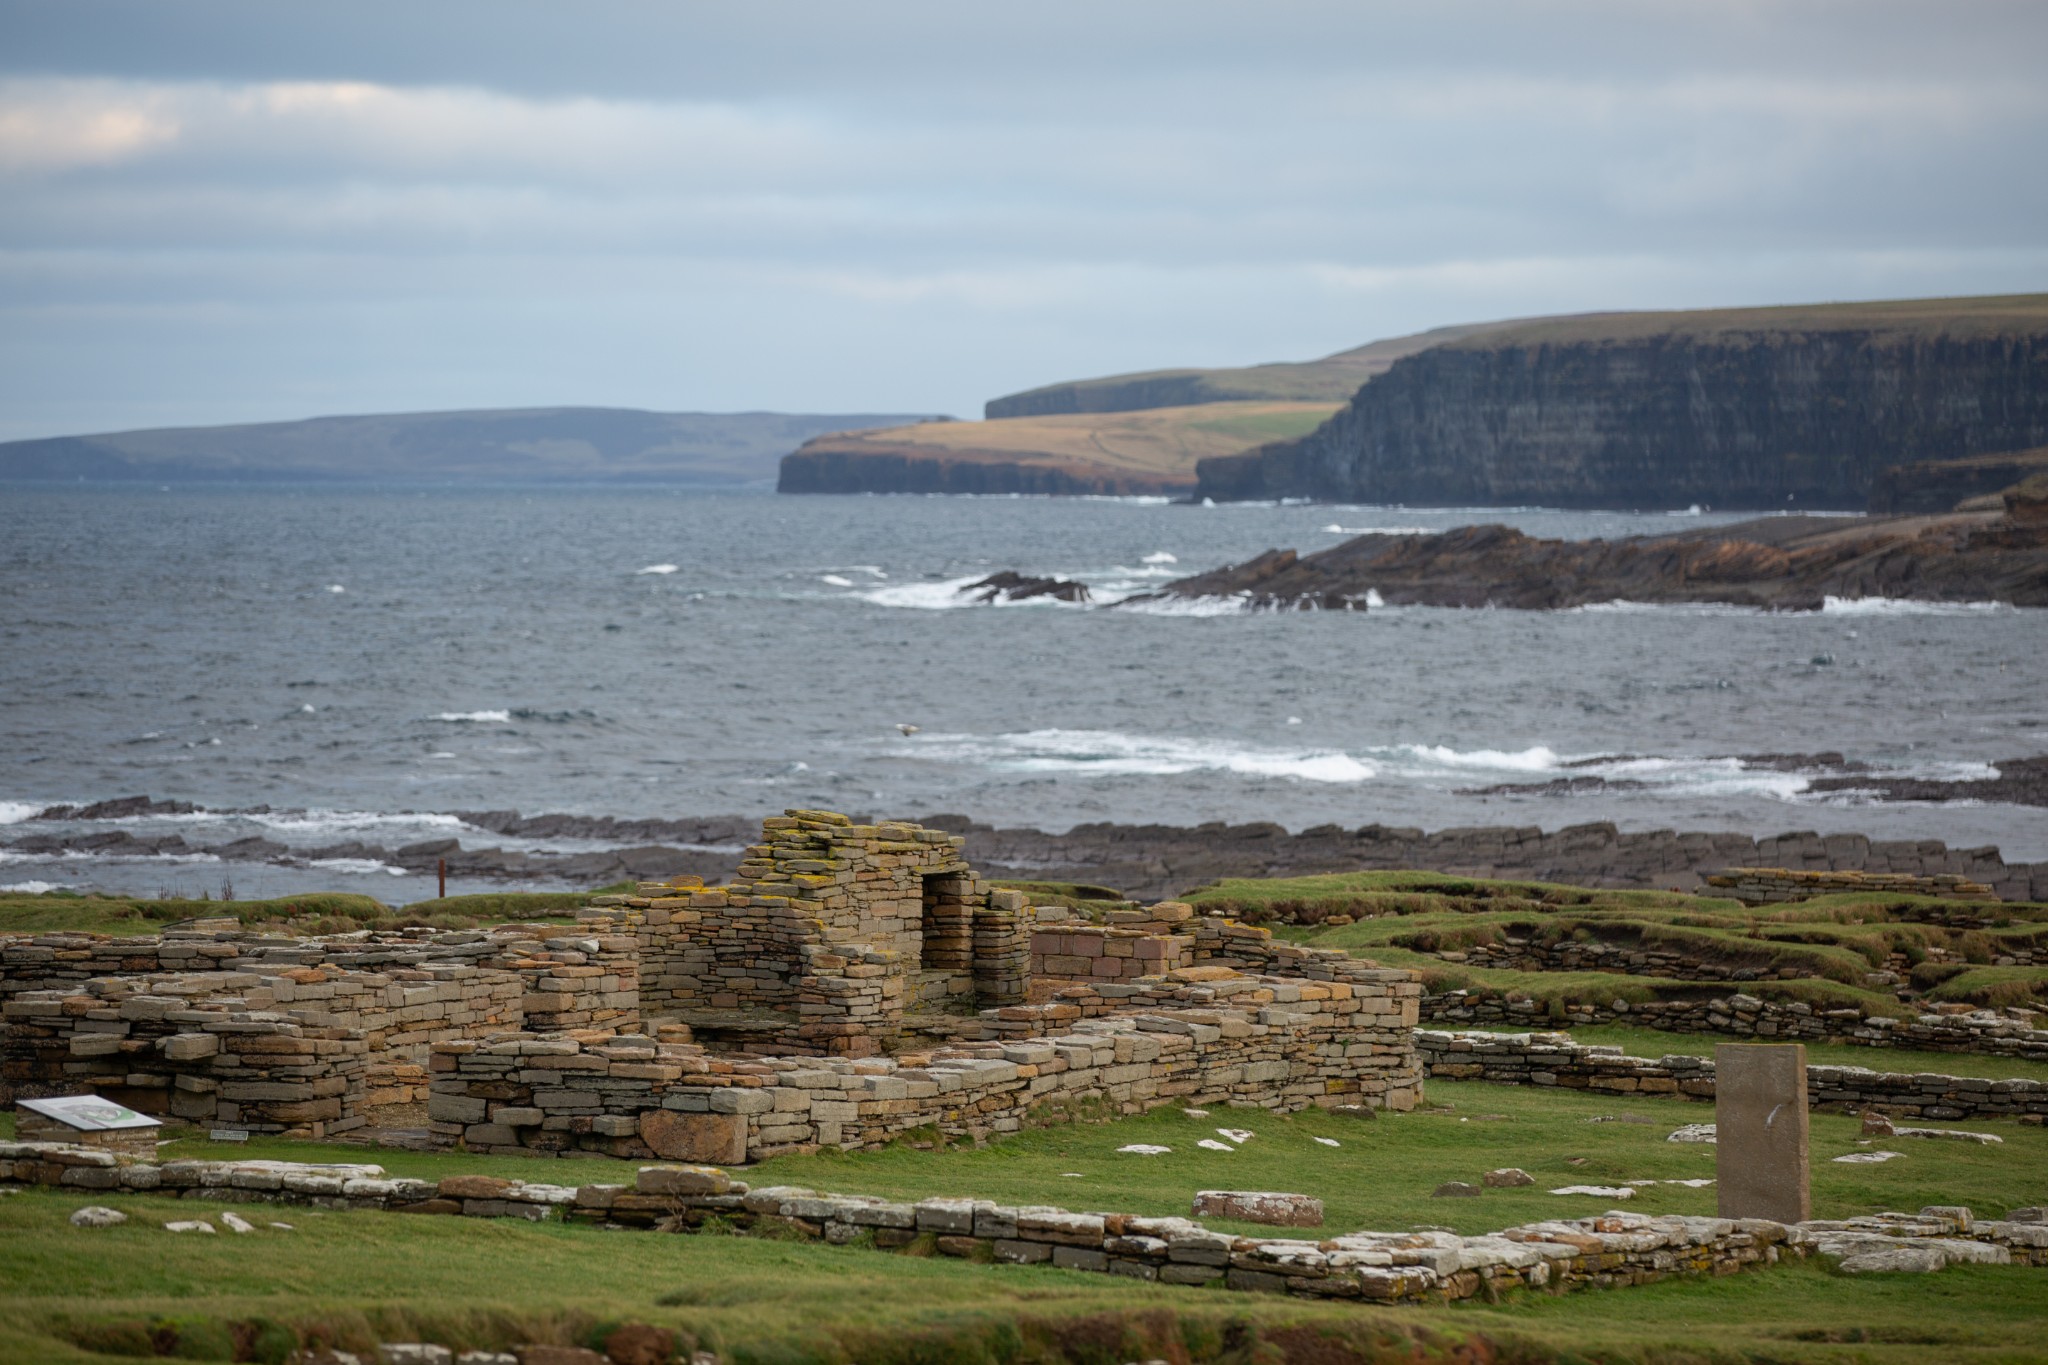 View towards the Orkney mainland from the Brough of Birsay, Orkney